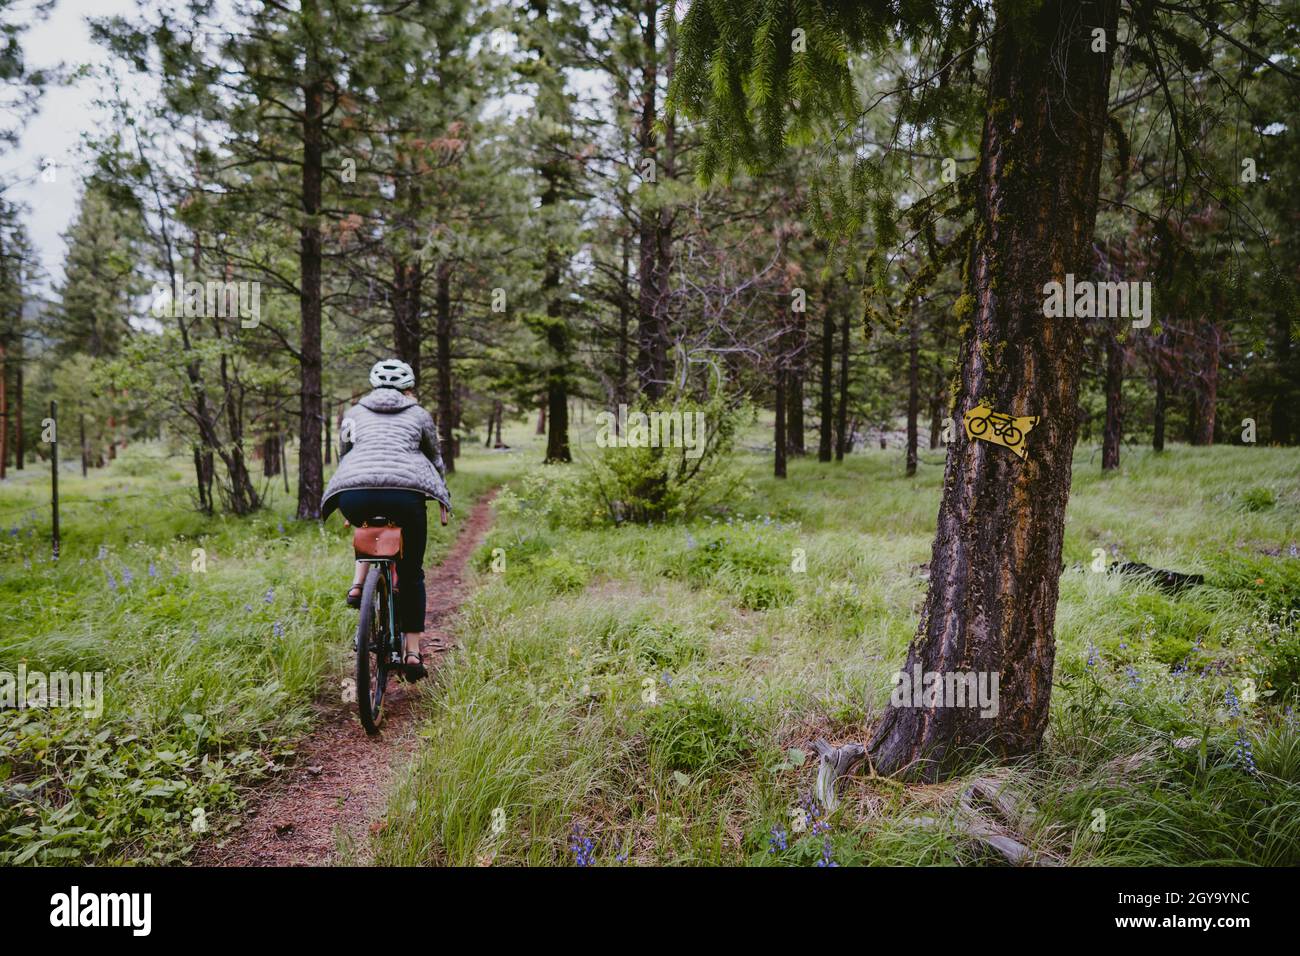 Cyclist on single track trail bikes through forest Stock Photo